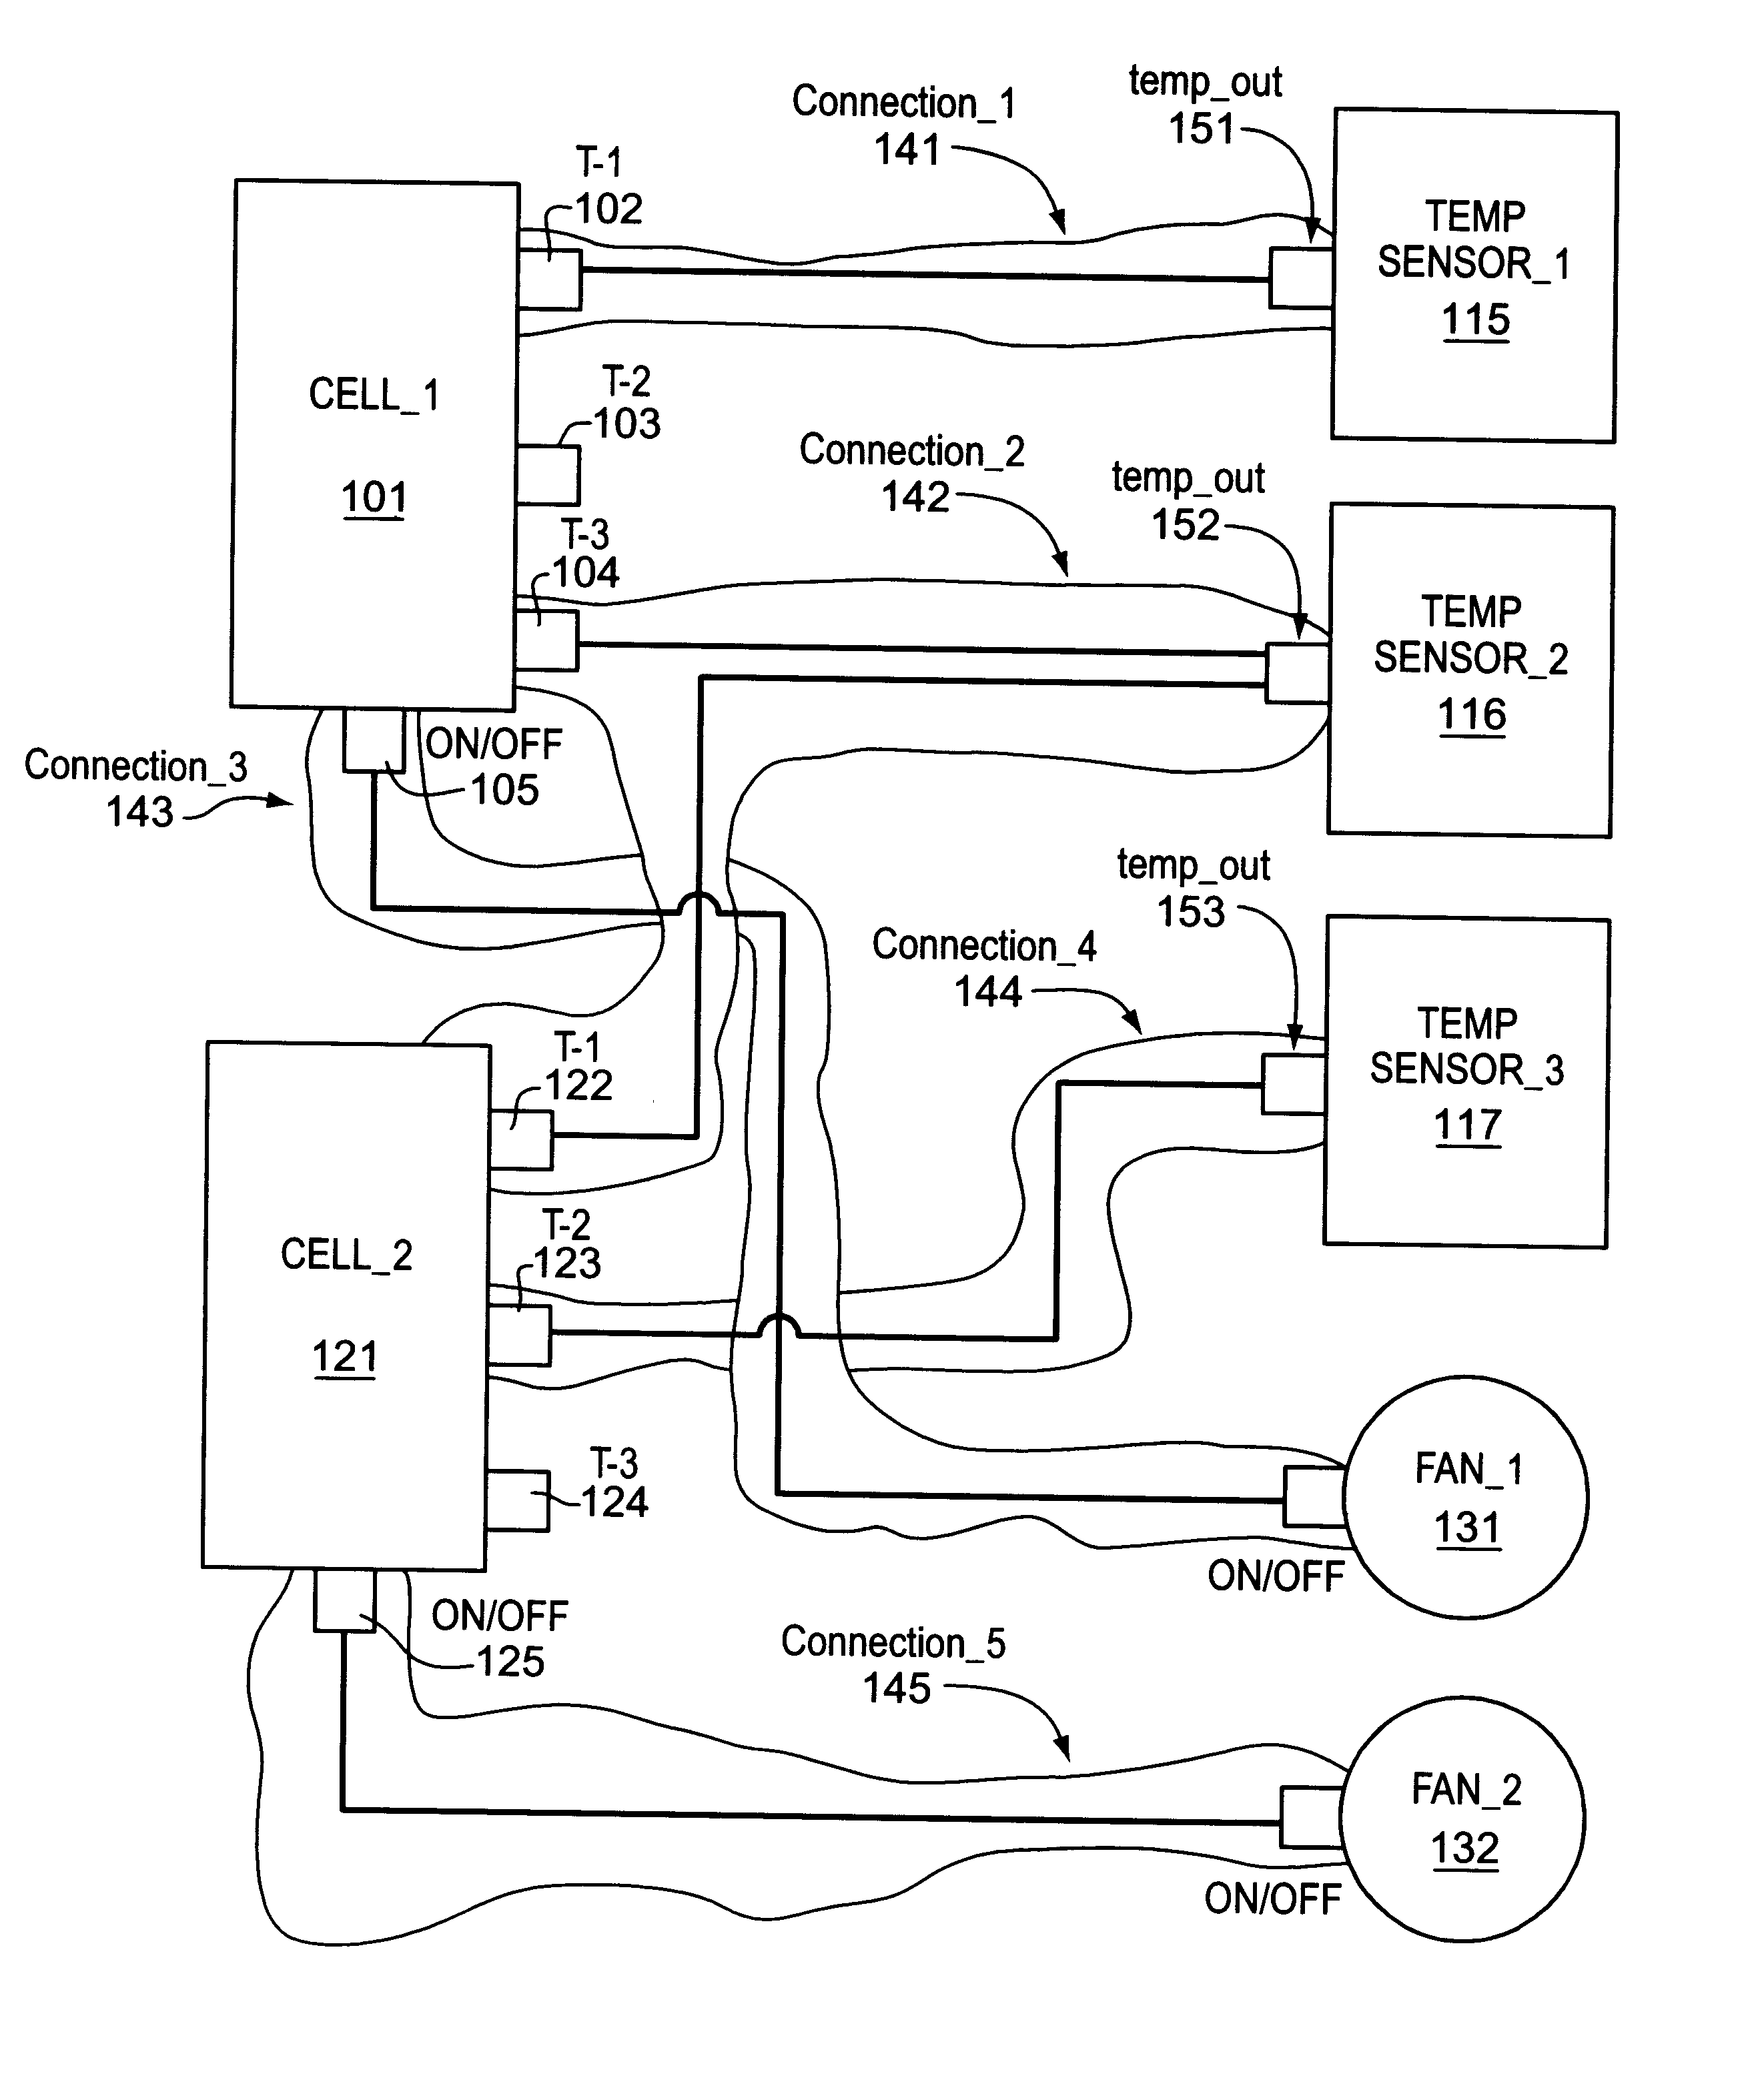 Method for enhancing the performance of a network